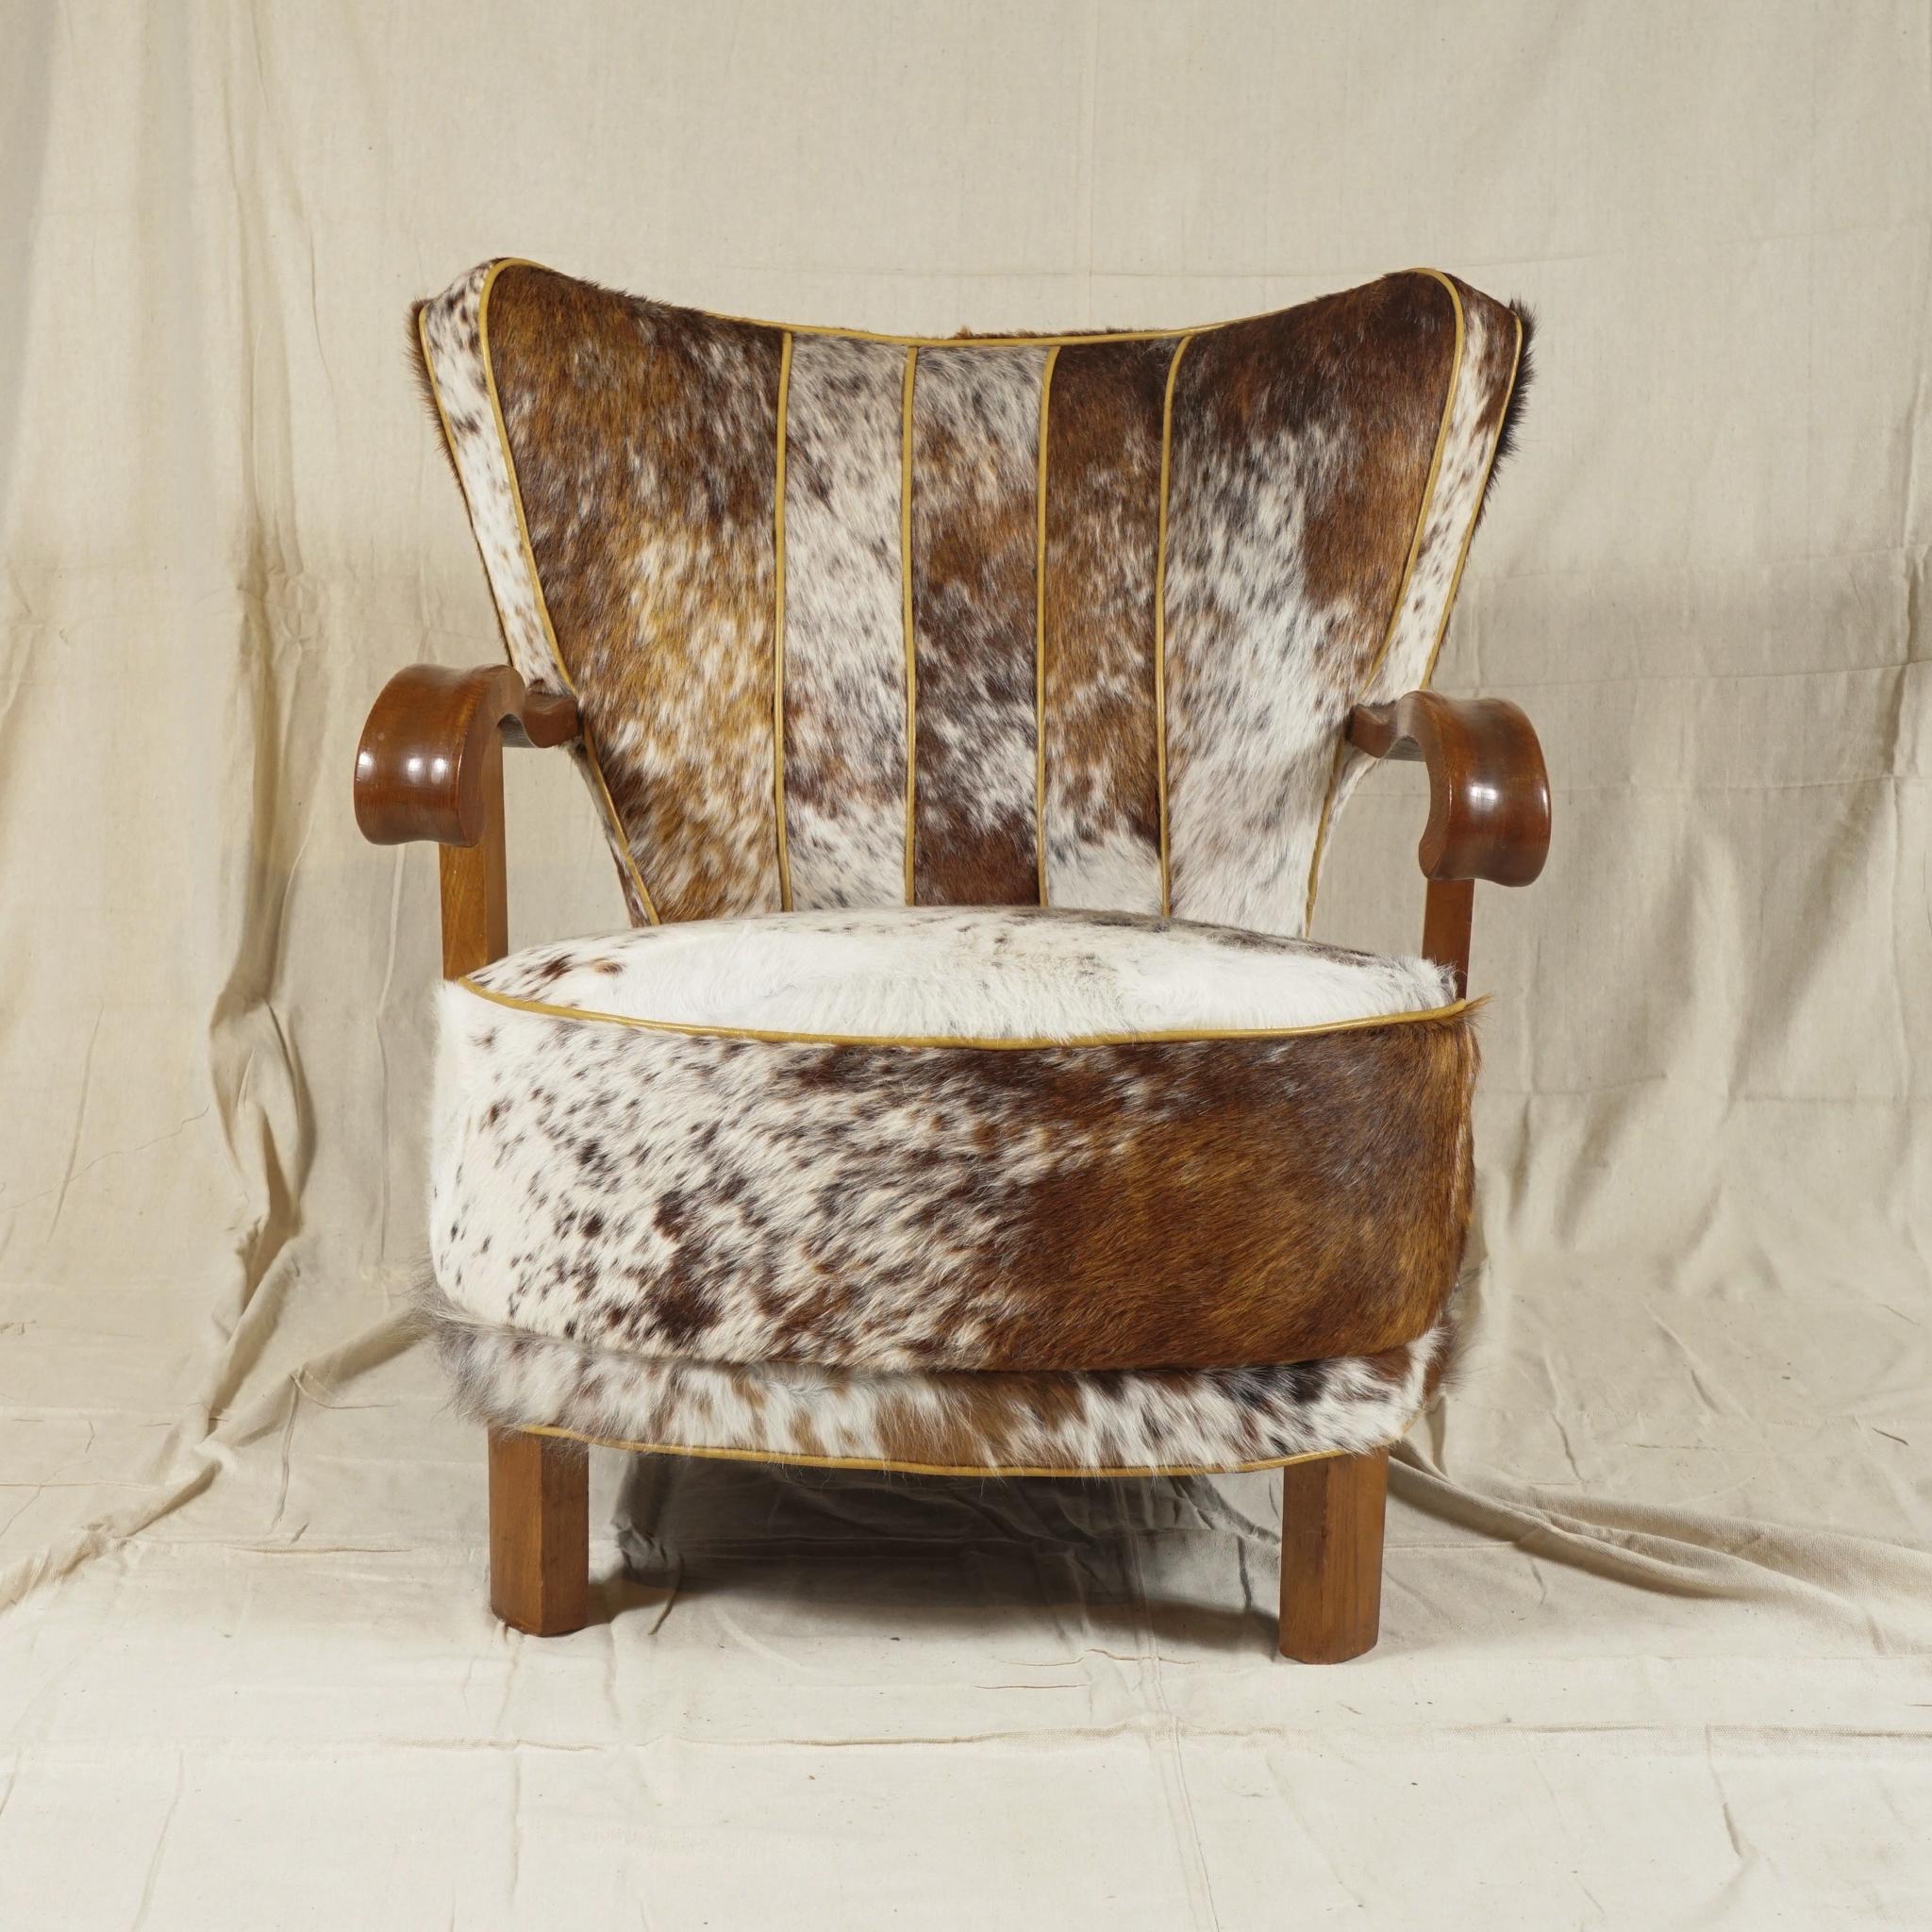 A sturdy, Danish modern easy armchair from 1940s recovered in patterned soft cowhide,
with strong, curved oak arms just in the right place and most comfortable to sit in. Great for study, library or living room.
  